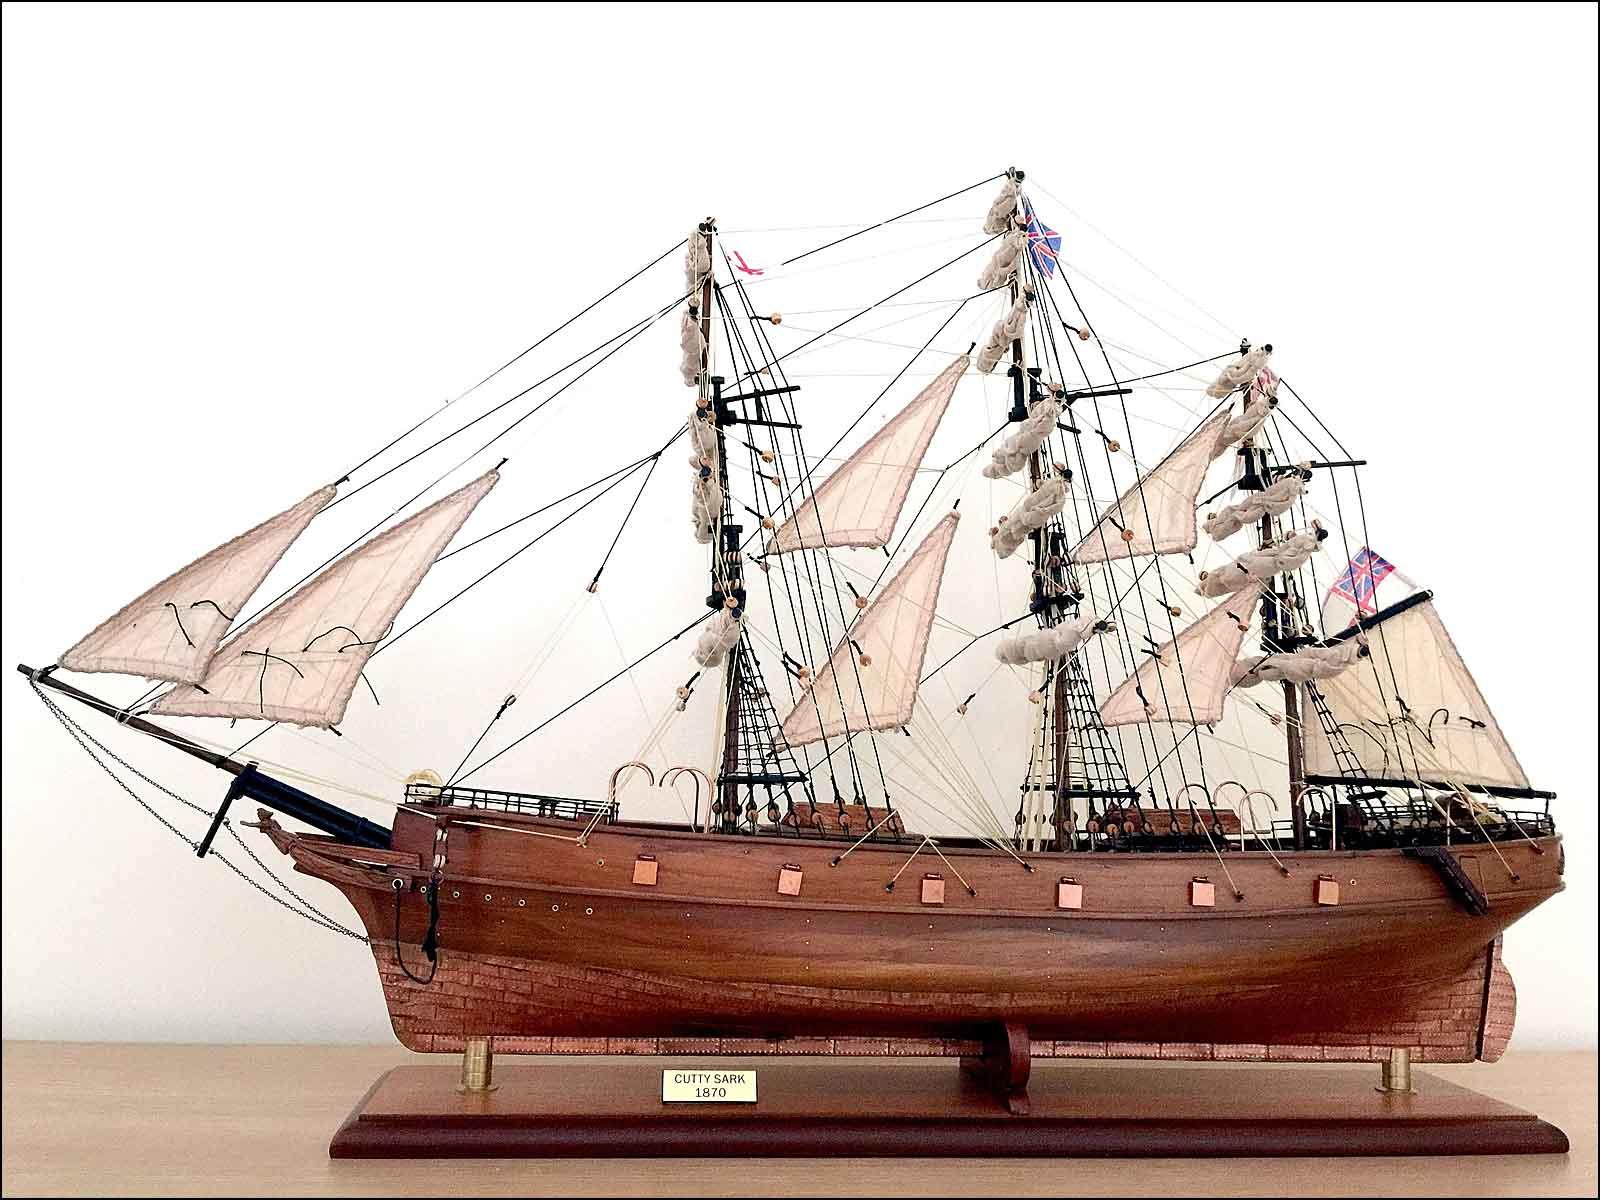 completed Cutty Sark 1869 model ship